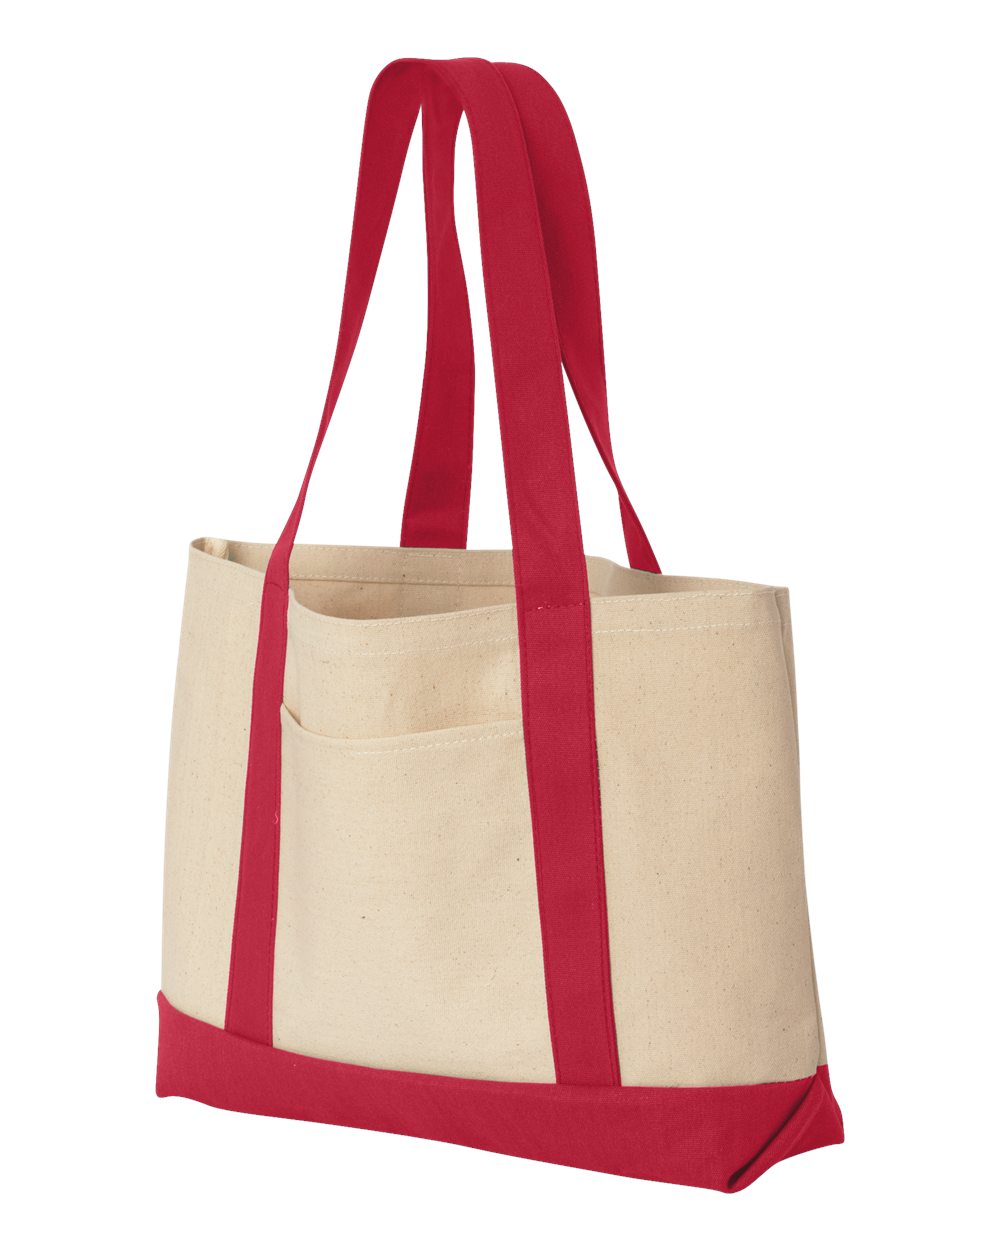 Liberty Bags 8869-11 Ounce Cotton Canvas Tote $7.50 - Bags